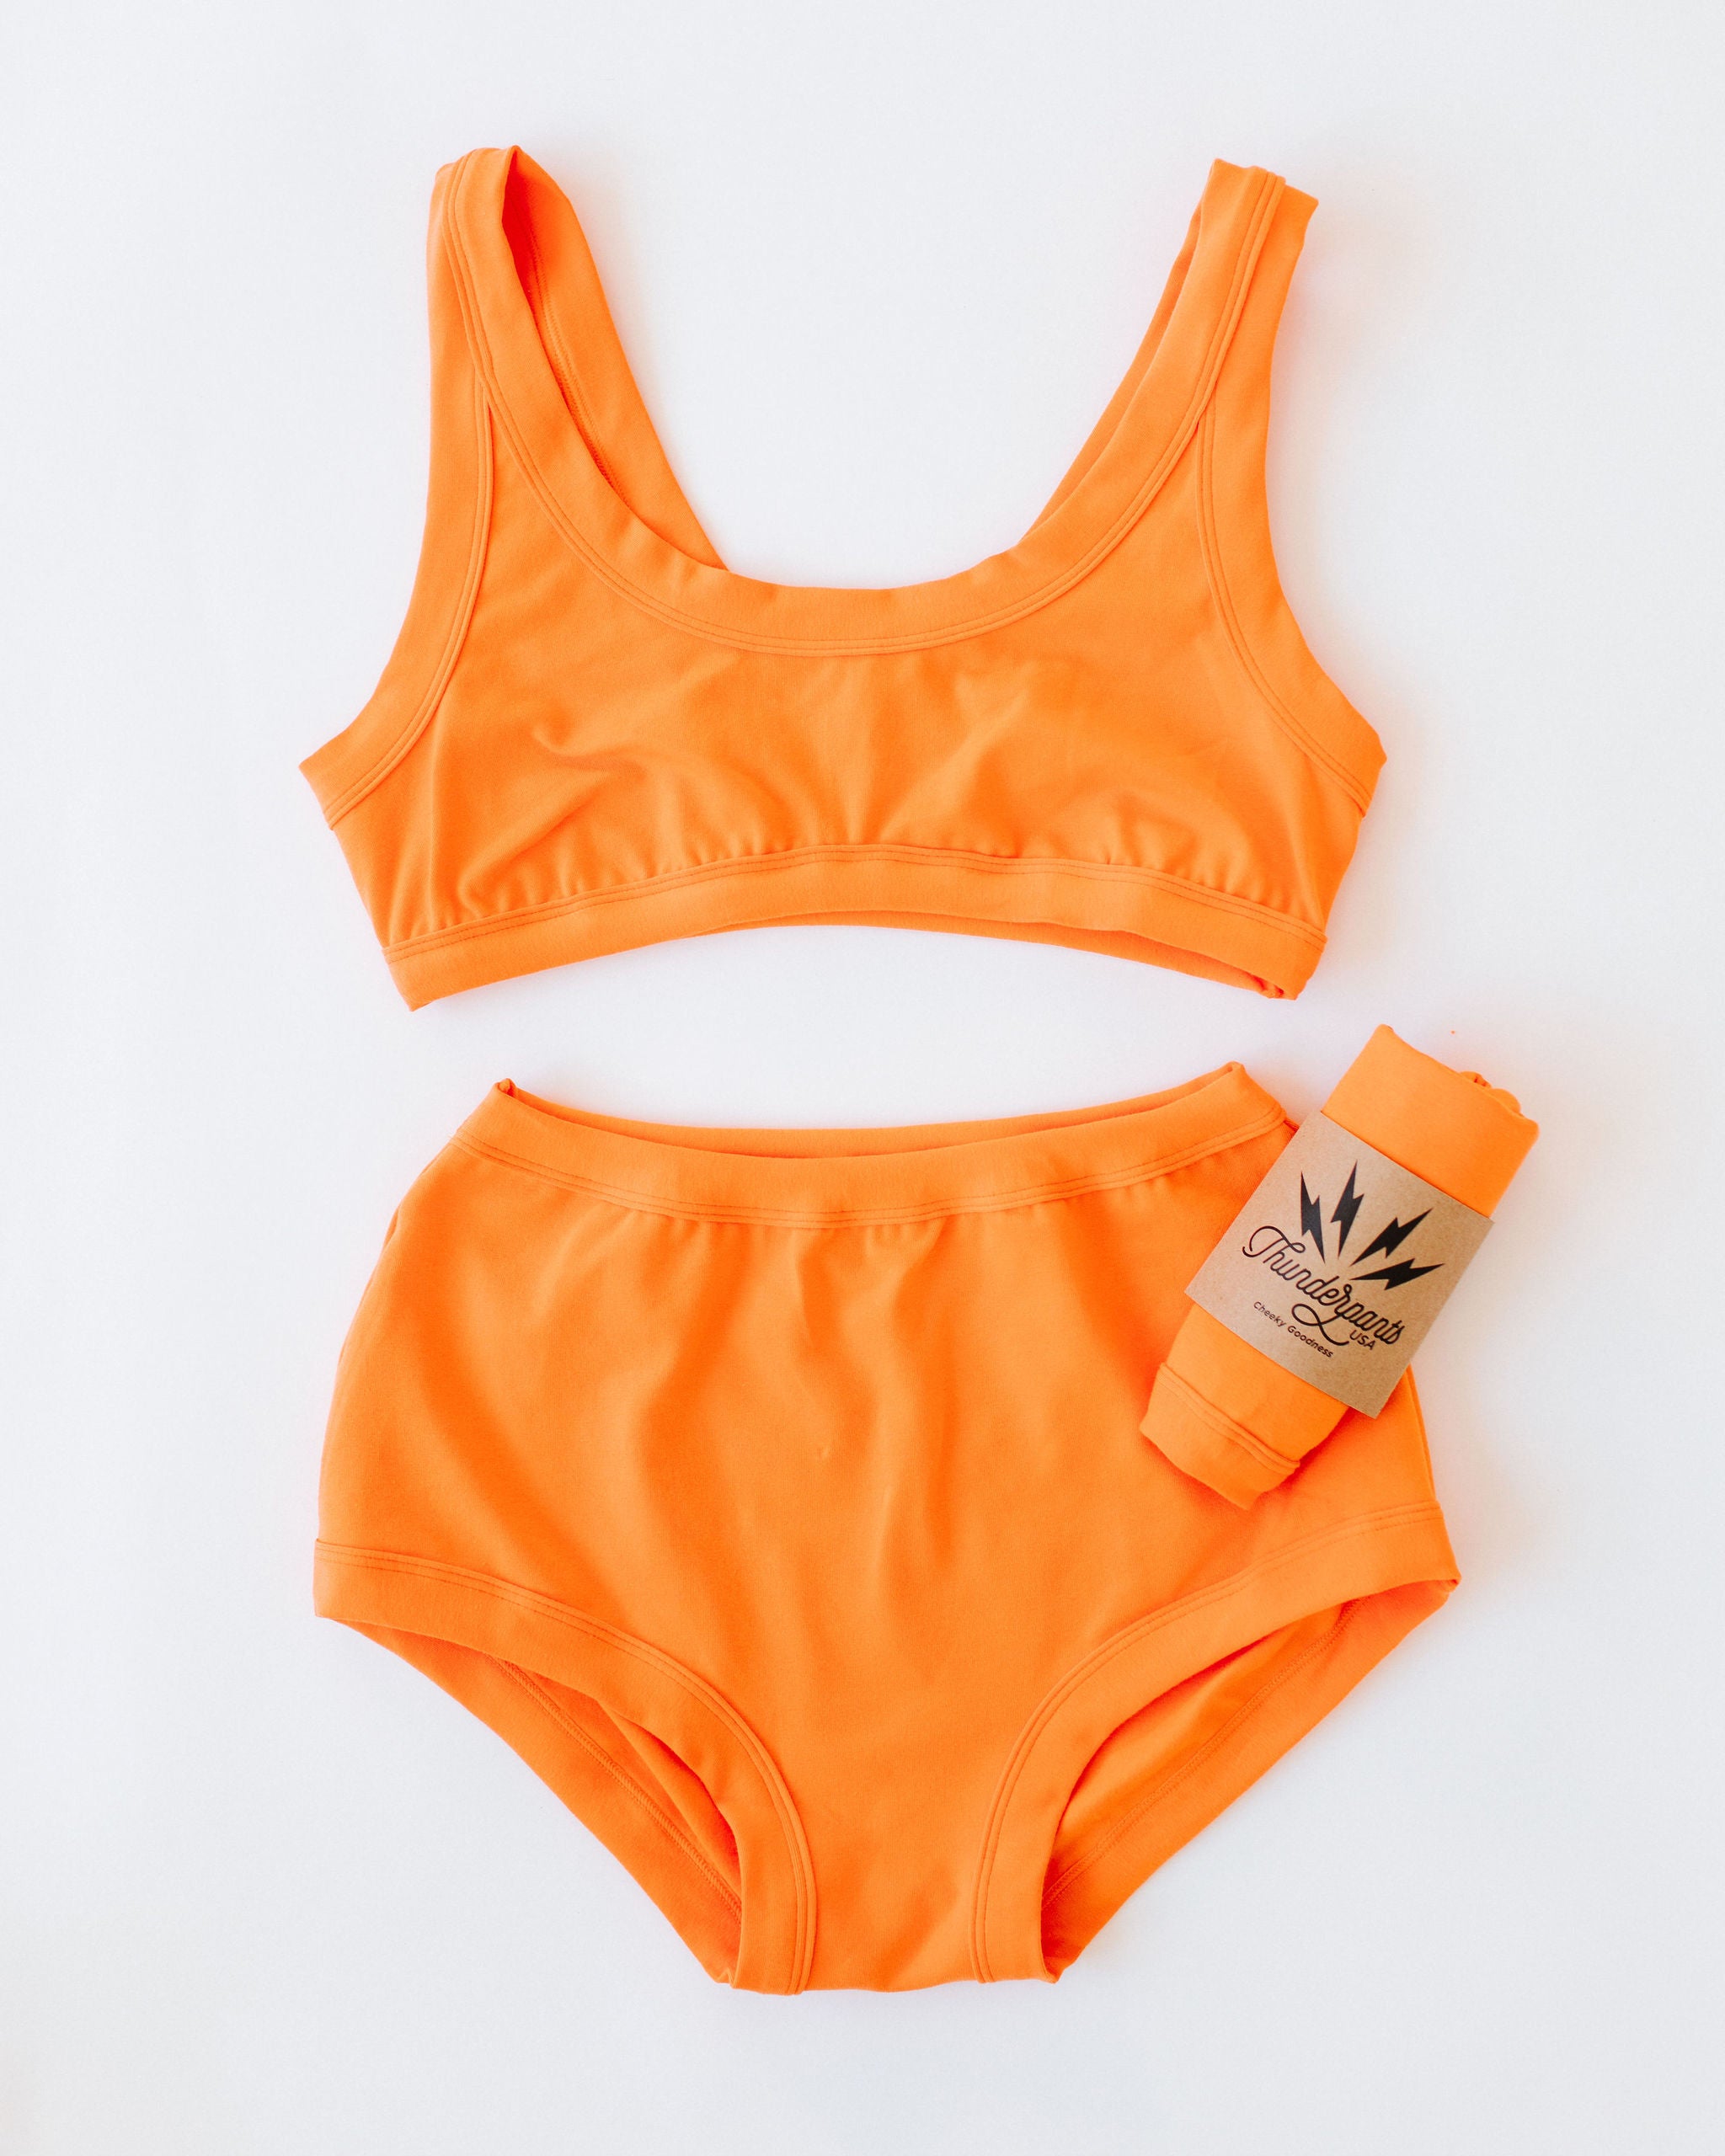 Flat lay of Thunderpants Original style underwear and Bralette in Oregon Sunstone orange color. 